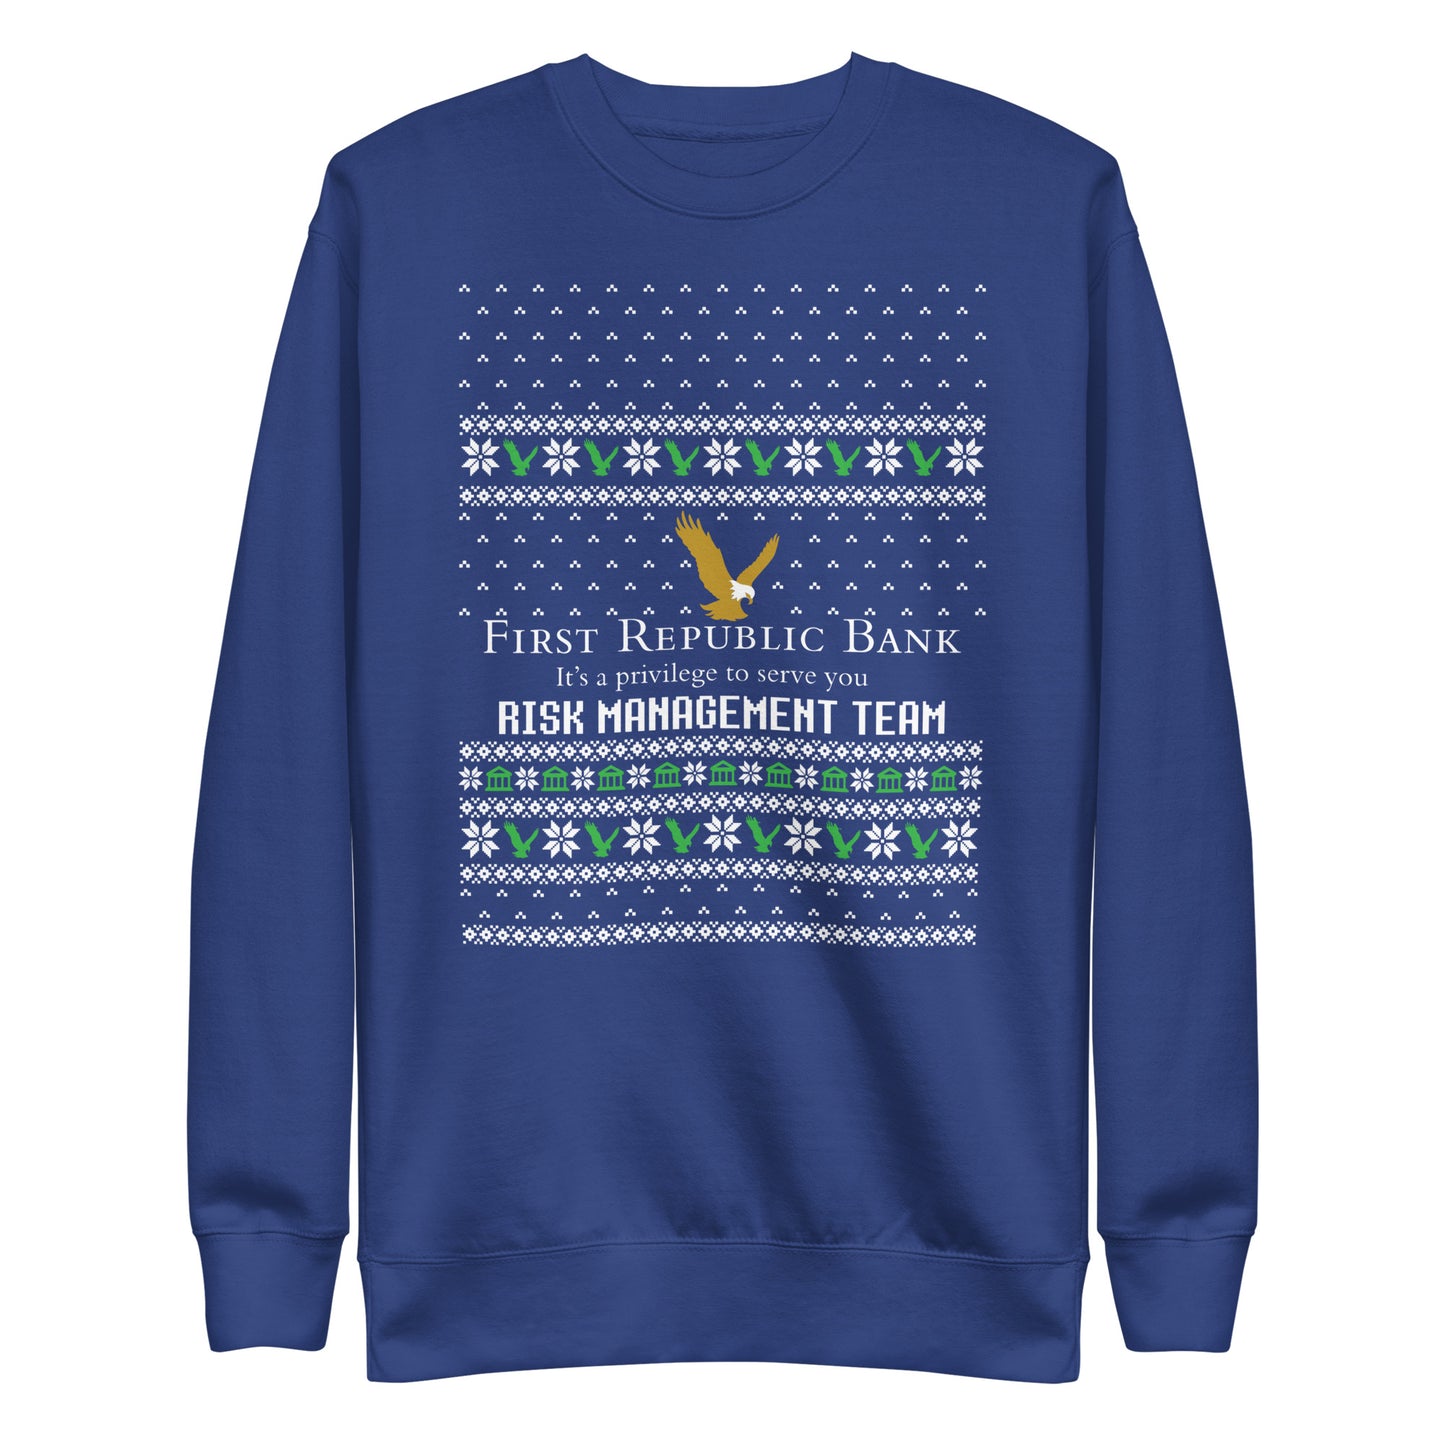 First Republic Bank Risk Management Team - Ugly Christmas Sweater